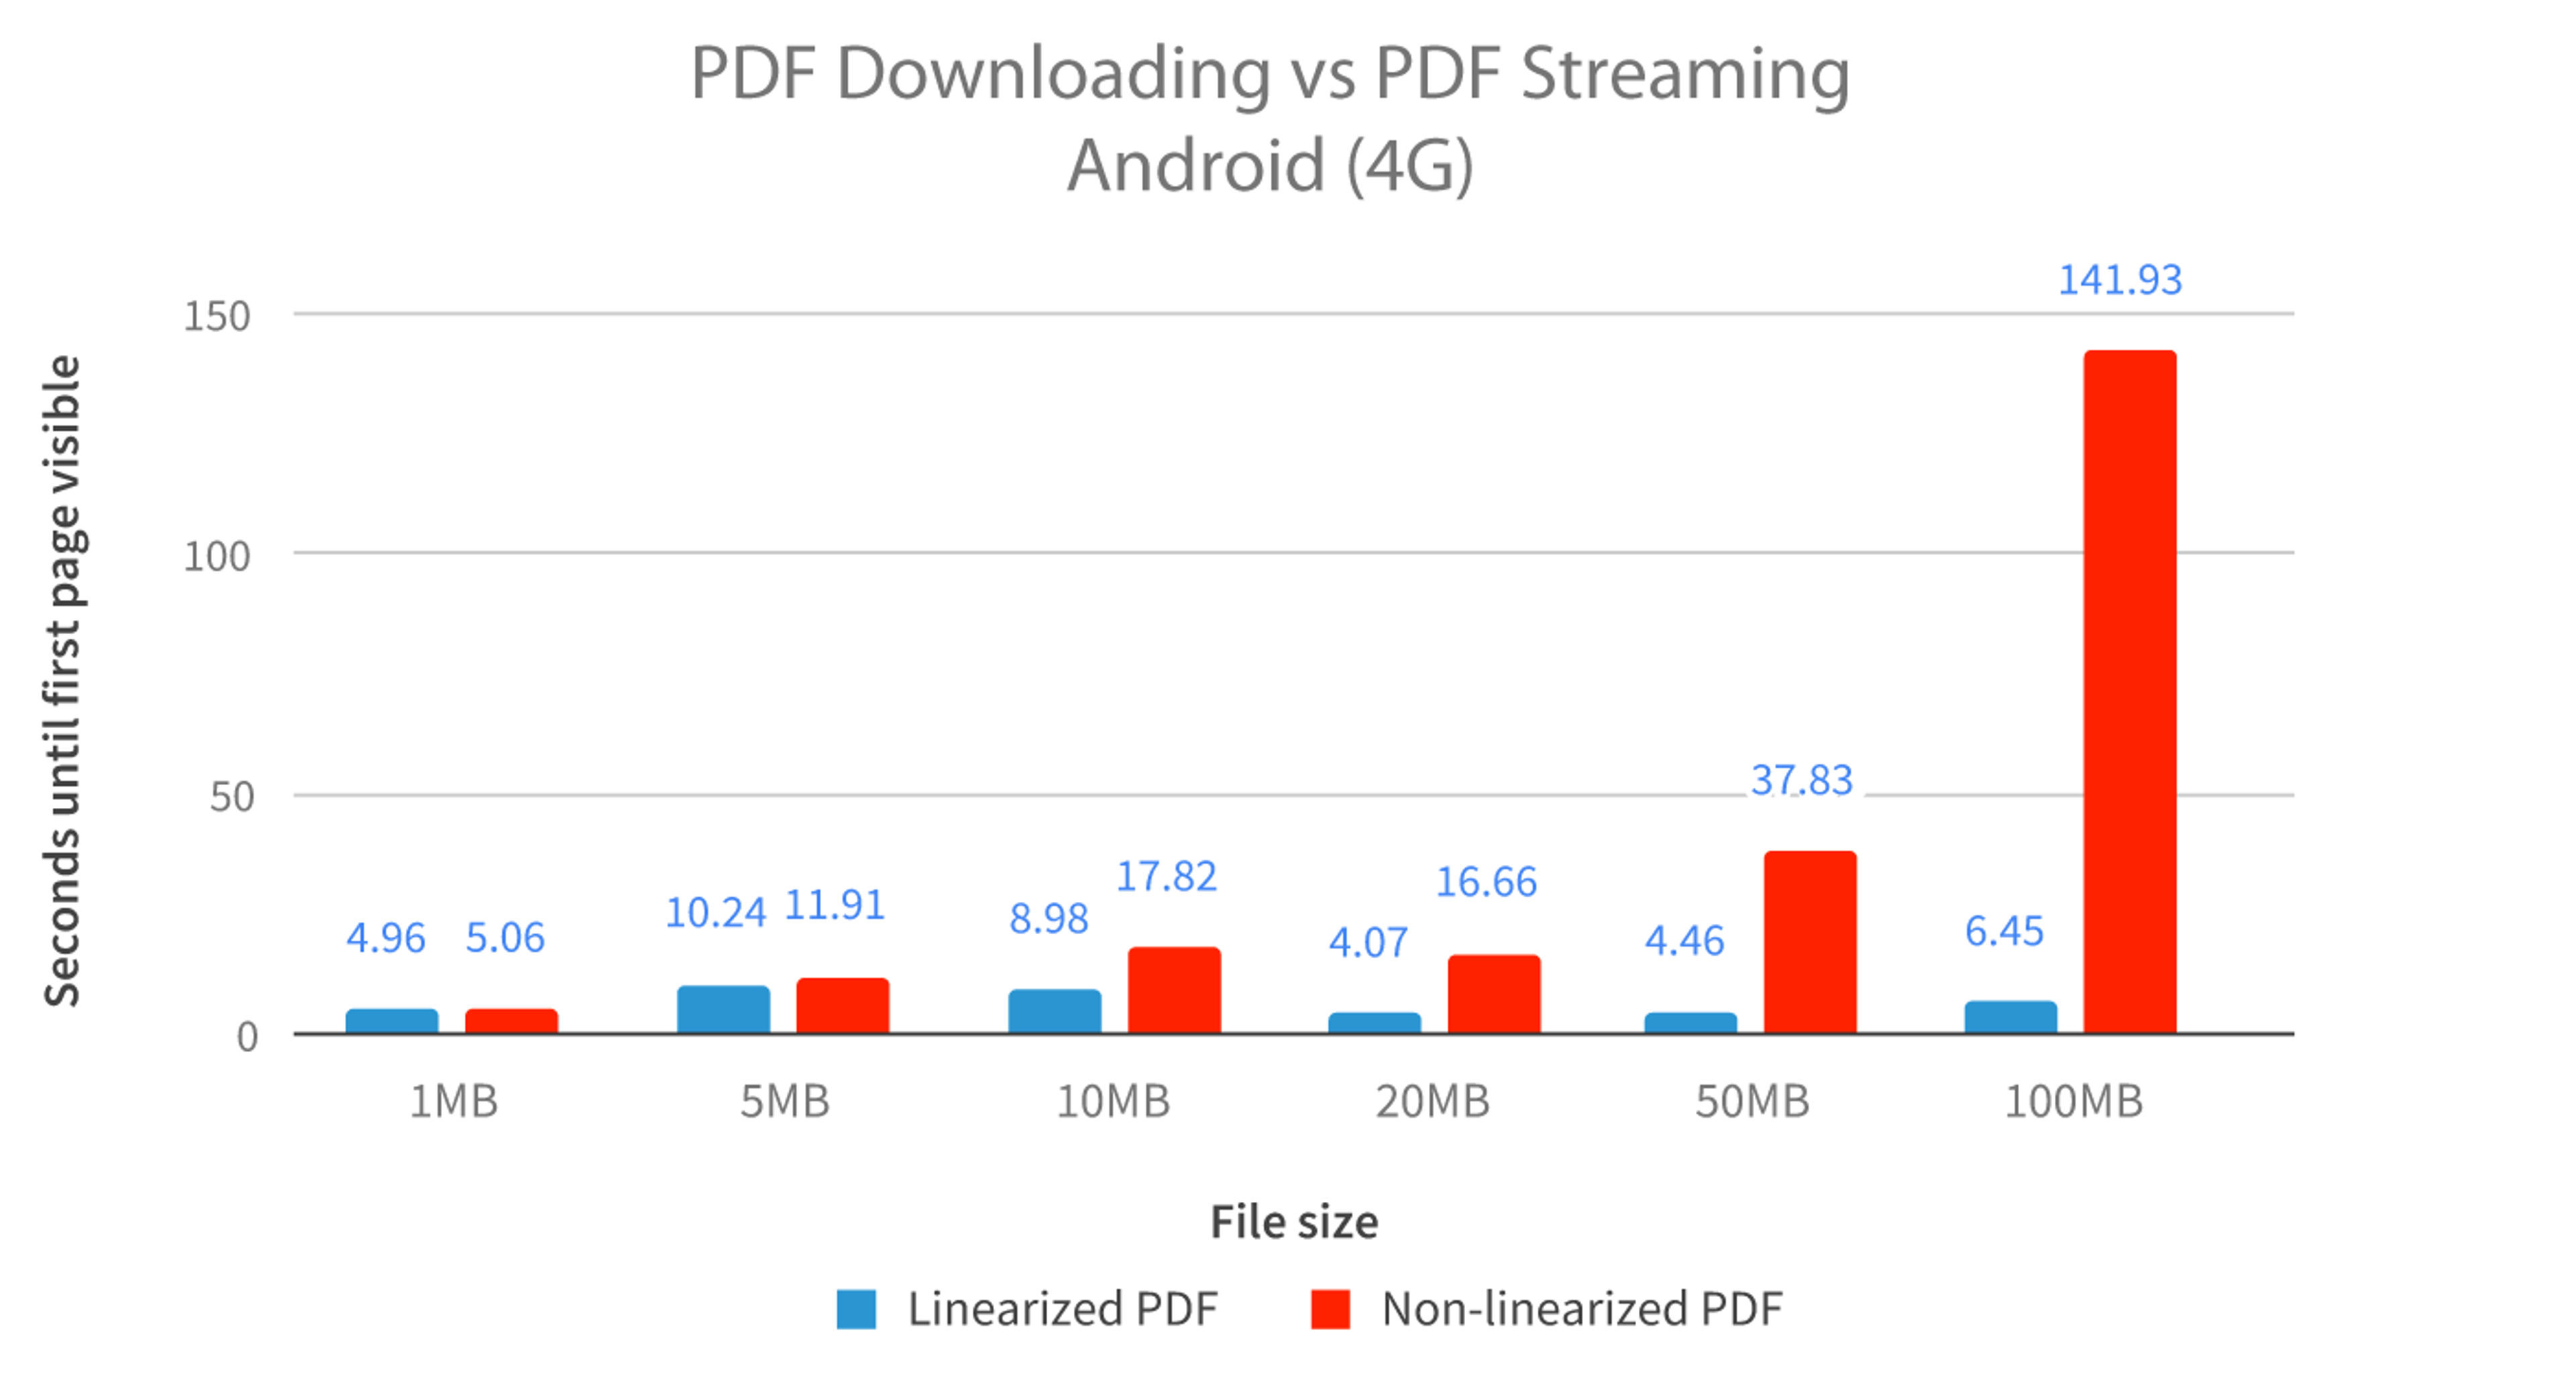 PDF download speeds Linearized PDF vs non-linearized PDF on Android